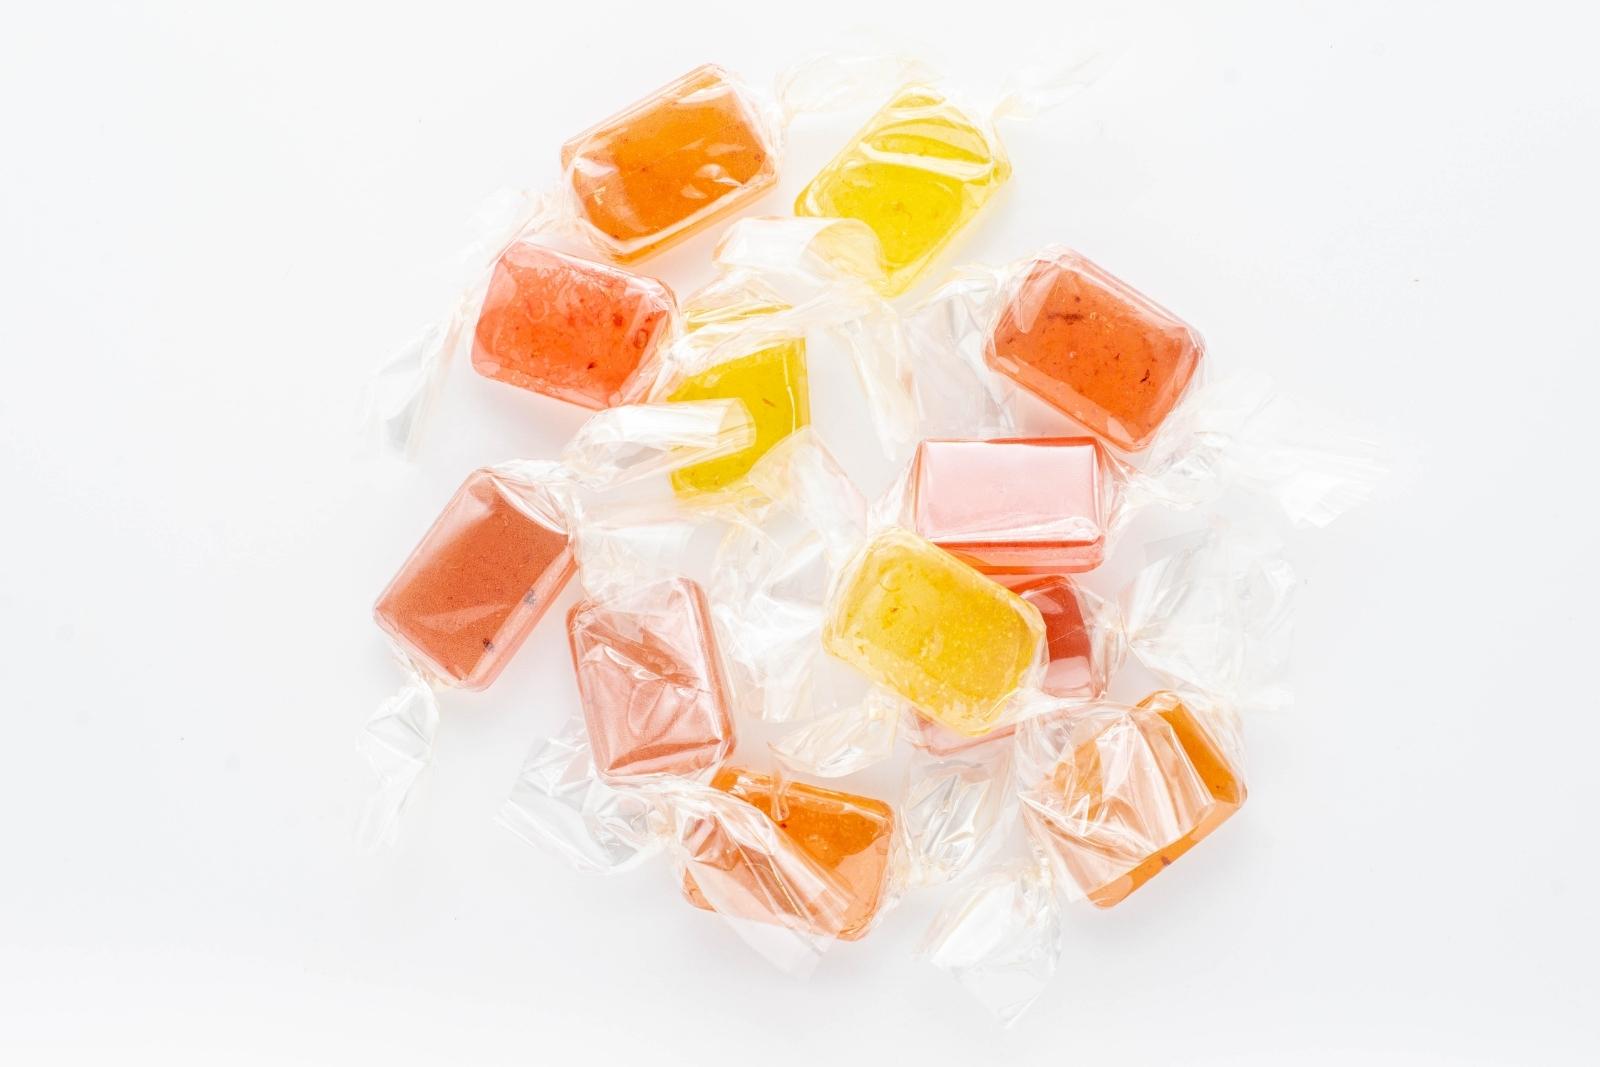 A group of the 12 hard candies, three of each flavor, that come in the Nice CBD Hard Candies Fruit Stand, on a white background